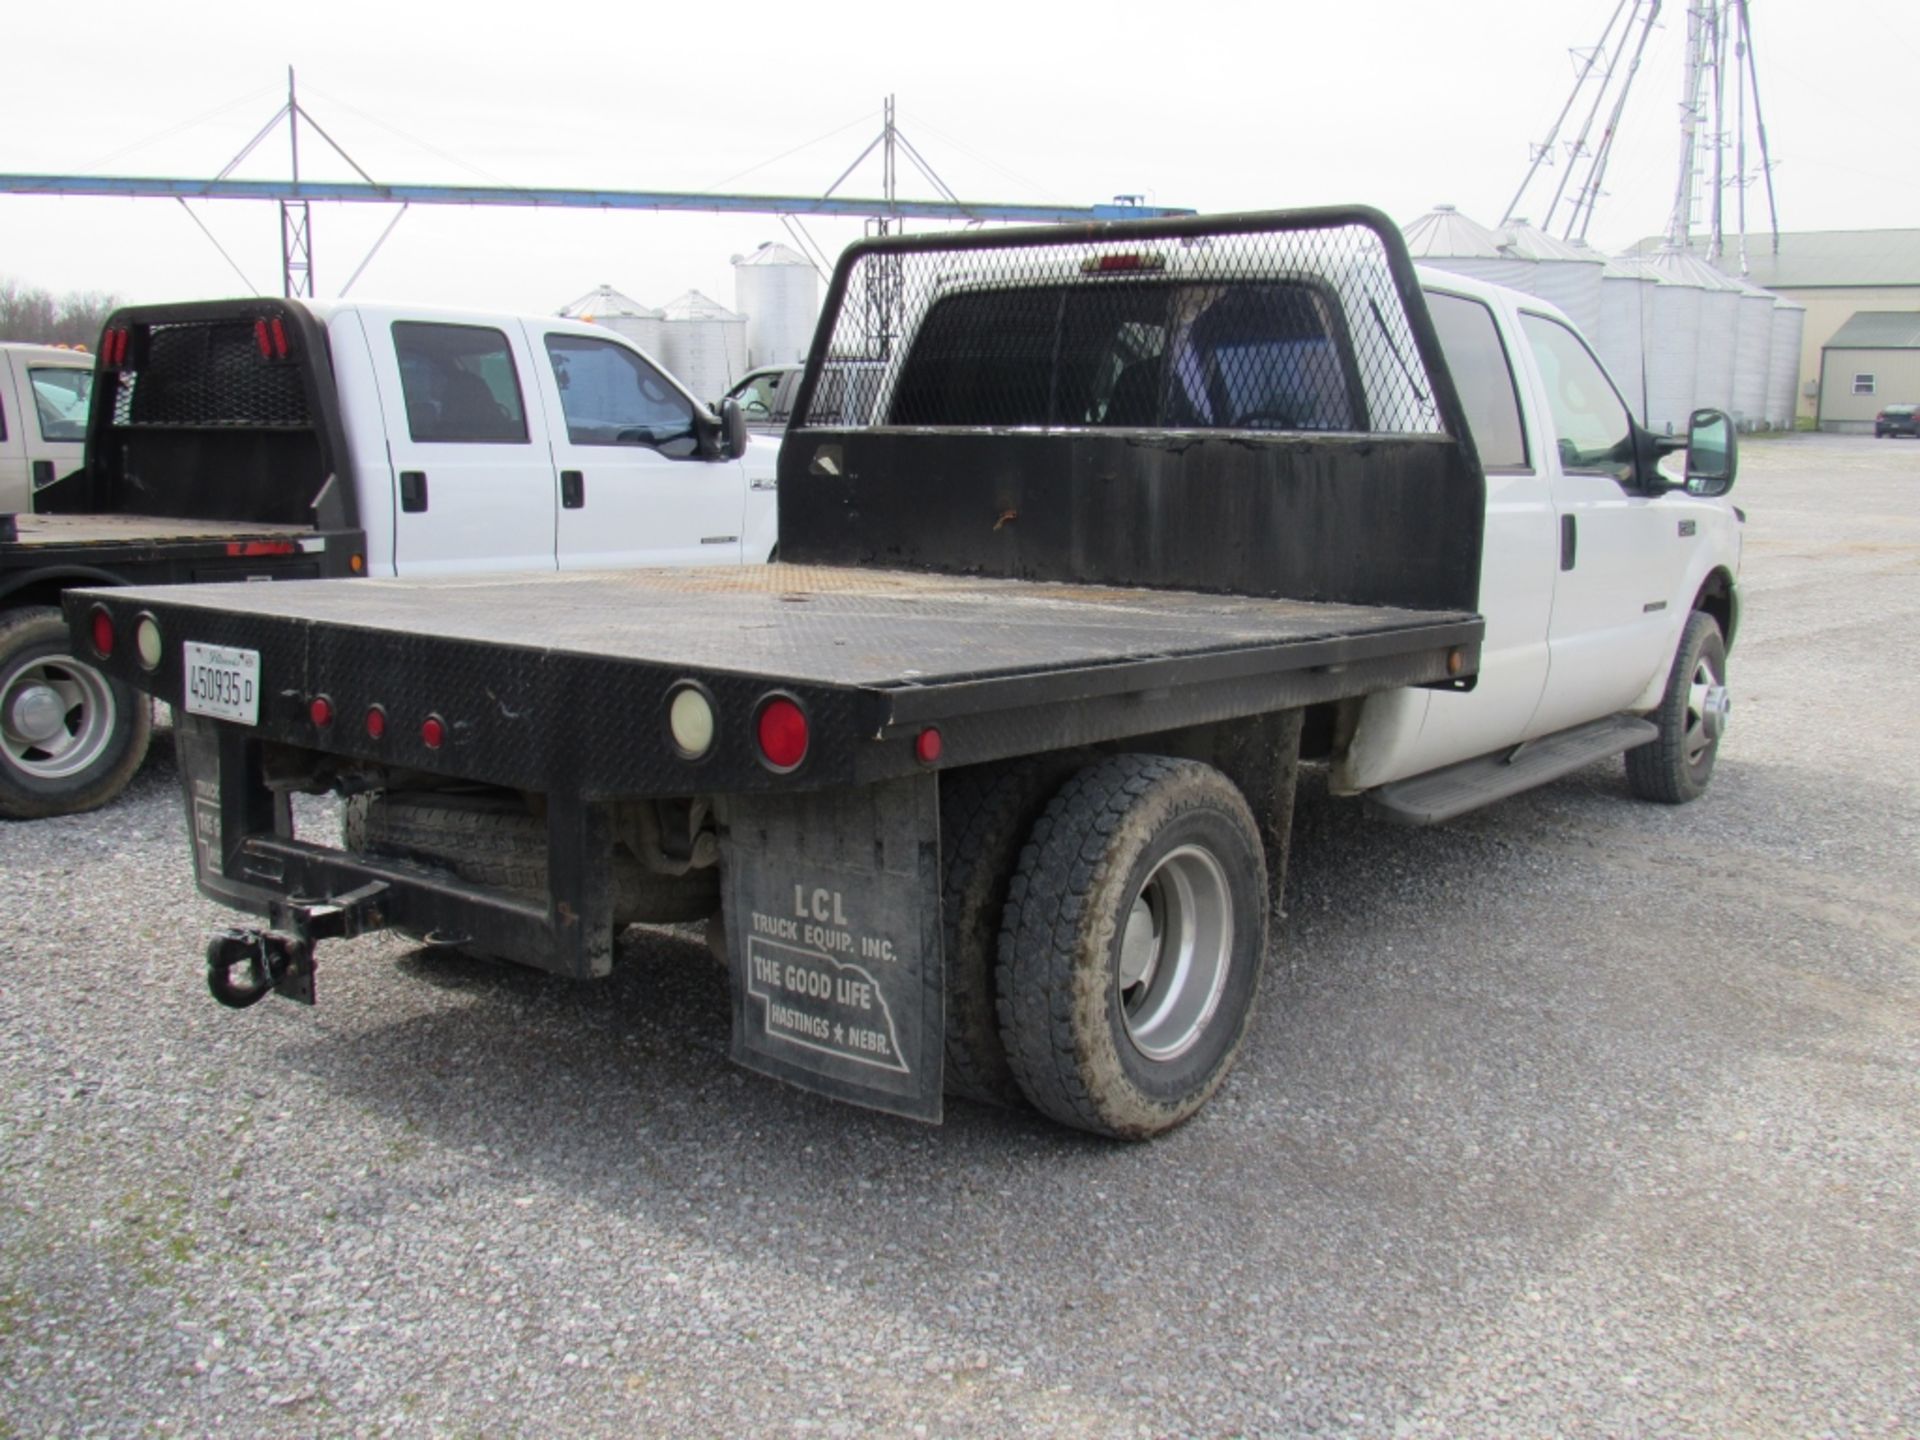 2001 Ford F350 Lariat Flatbed 4wd 7.3 L Powerstroke Diesel Engine - Image 6 of 21